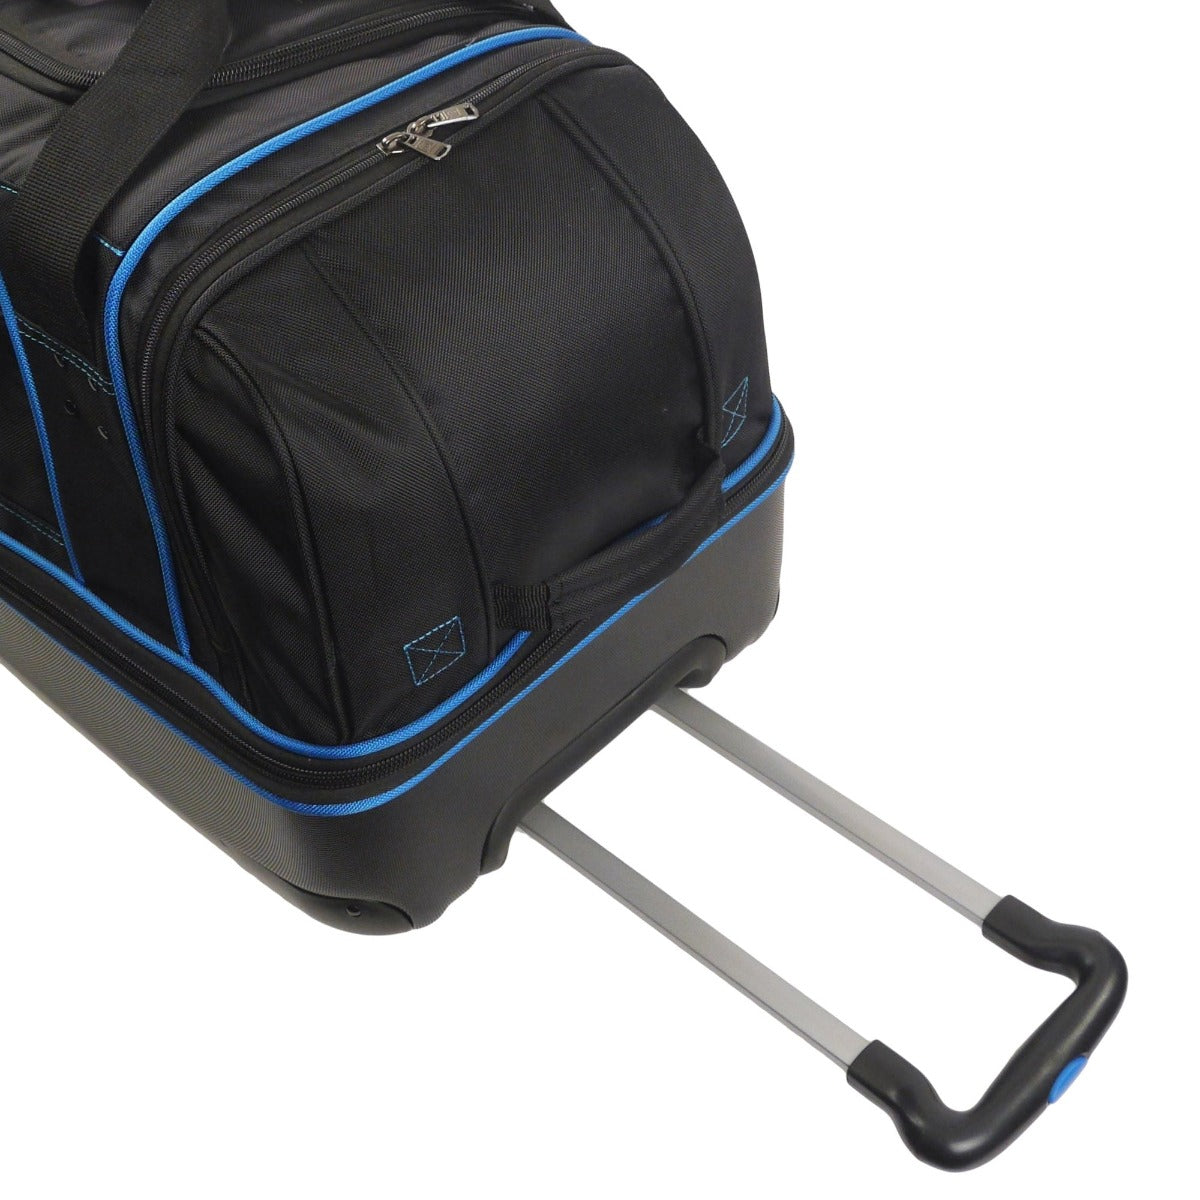 Ful Workhorse 30 inch extra large split level wheeled rolling duffle bag in black and blue detail